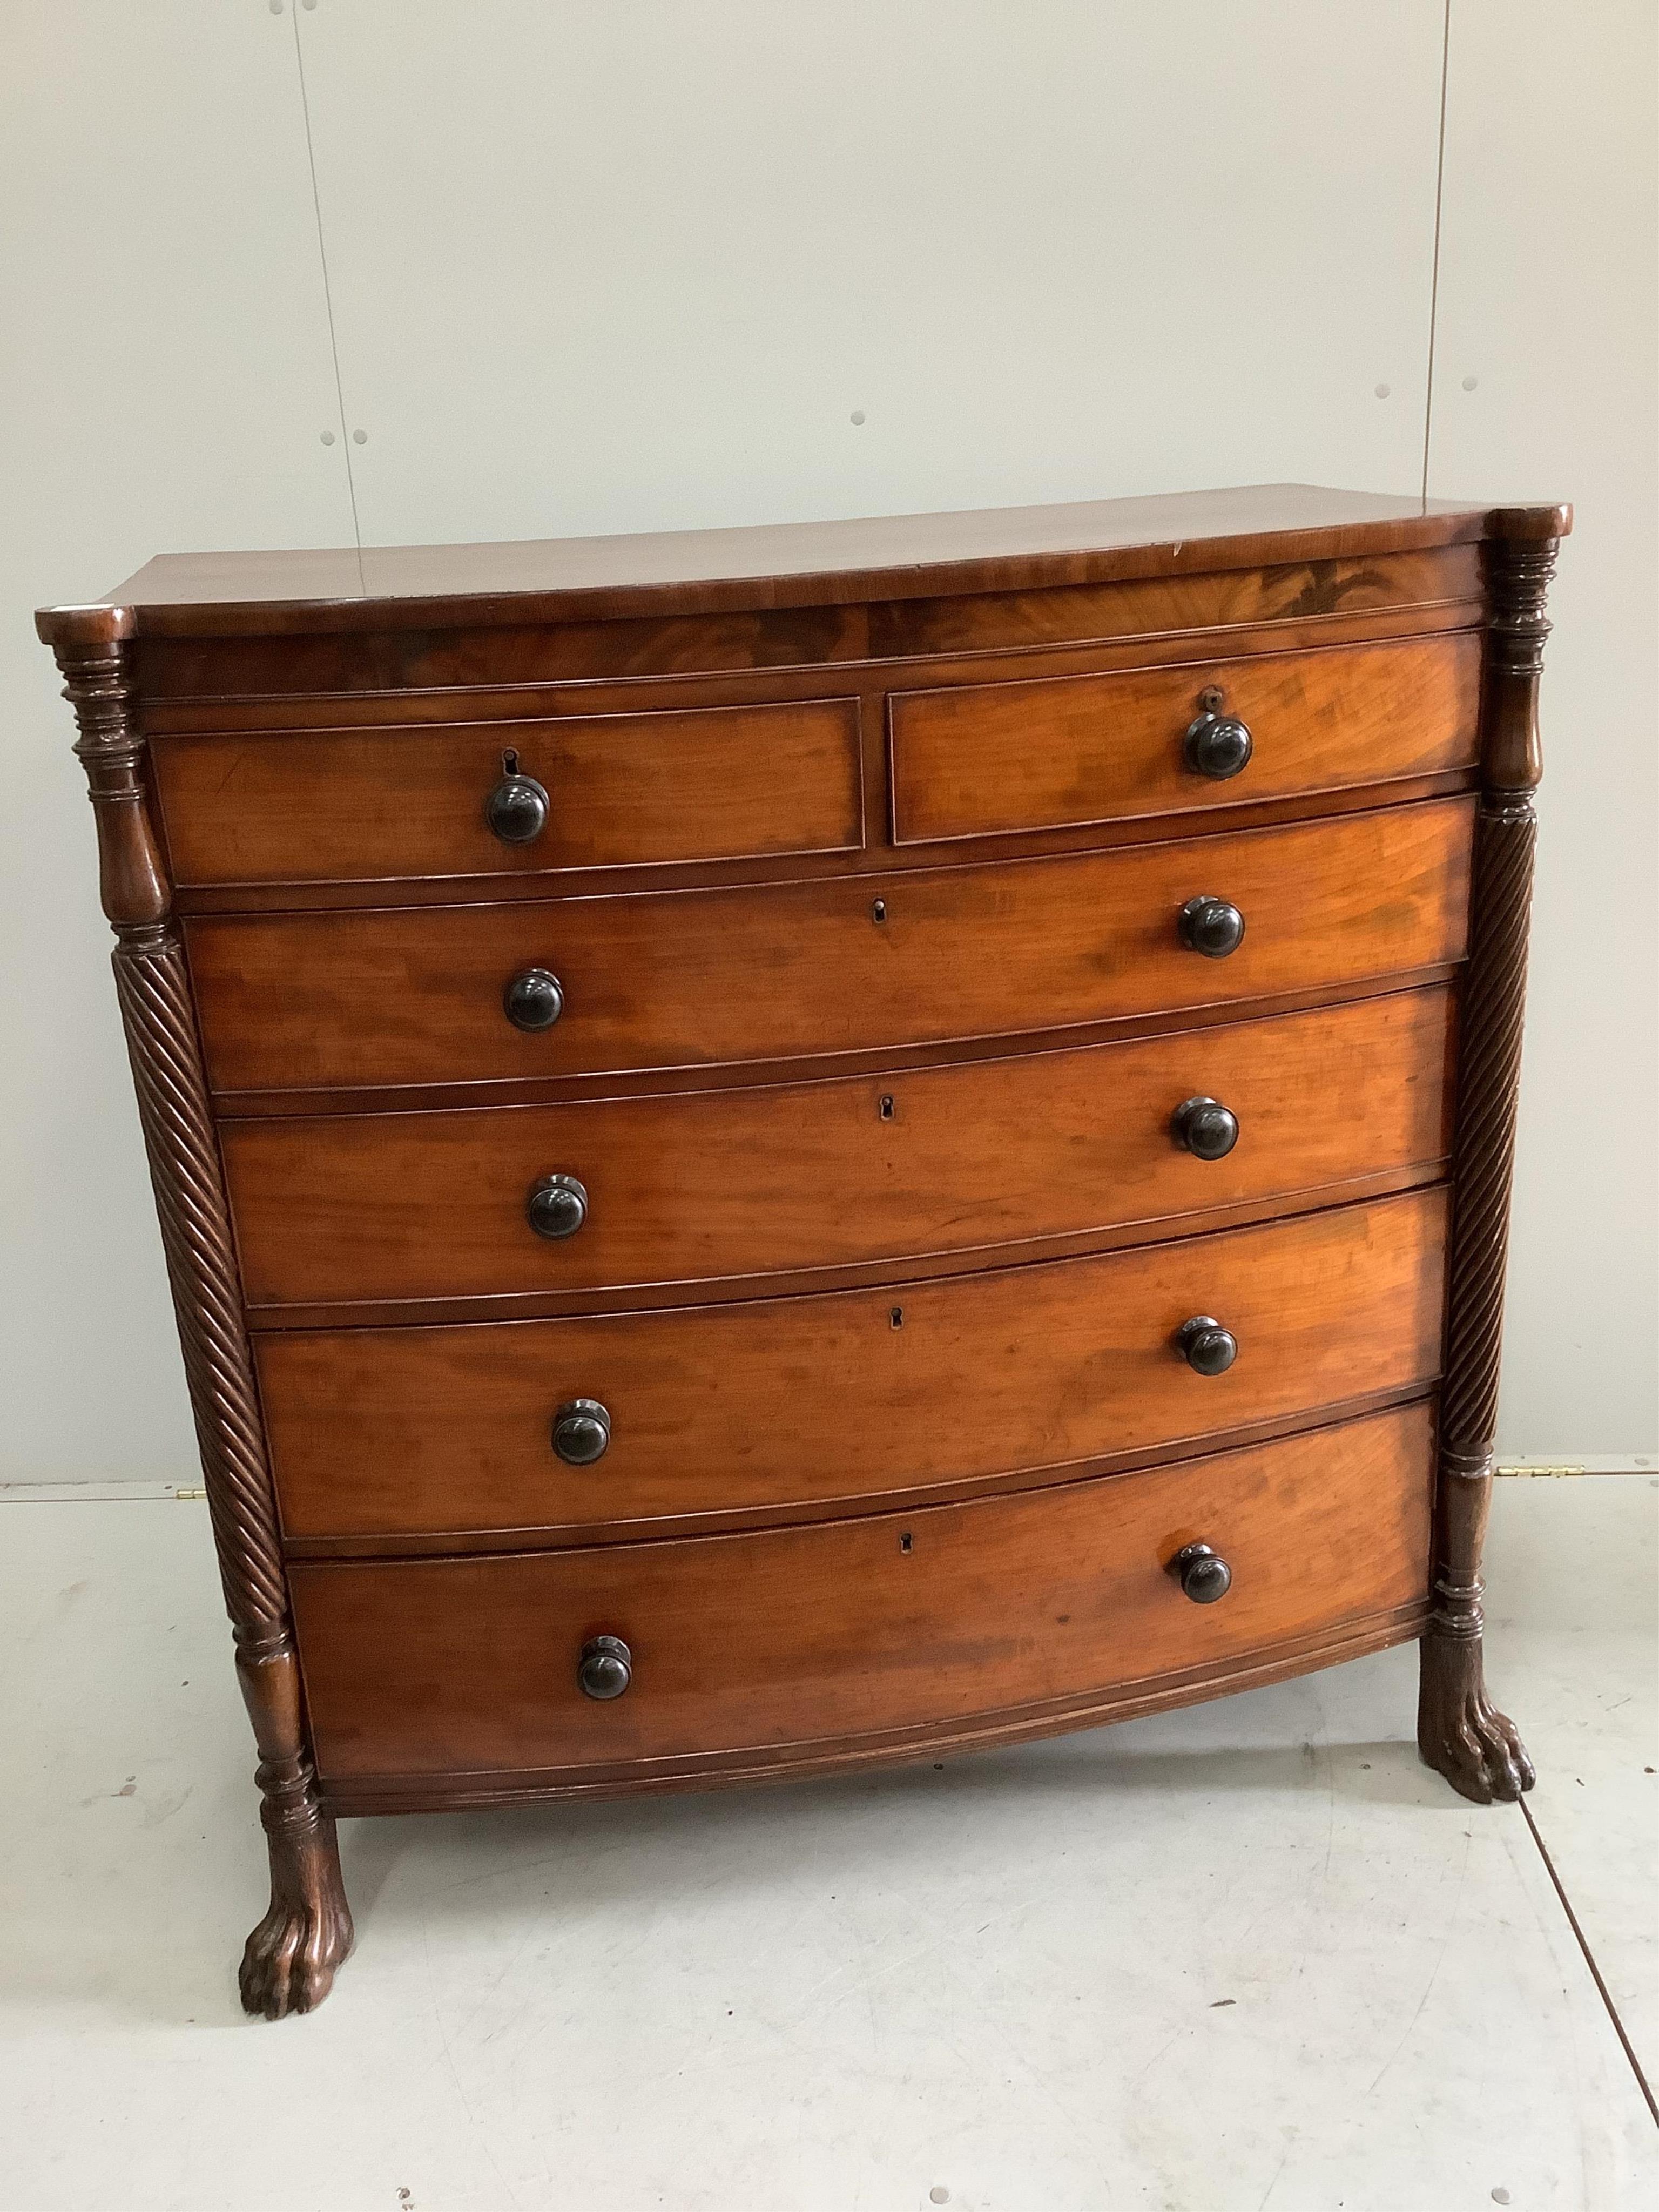 An early Victorian mahogany bowfront chest on lion paws feet, width 121cm, depth 57cm, height 124cm